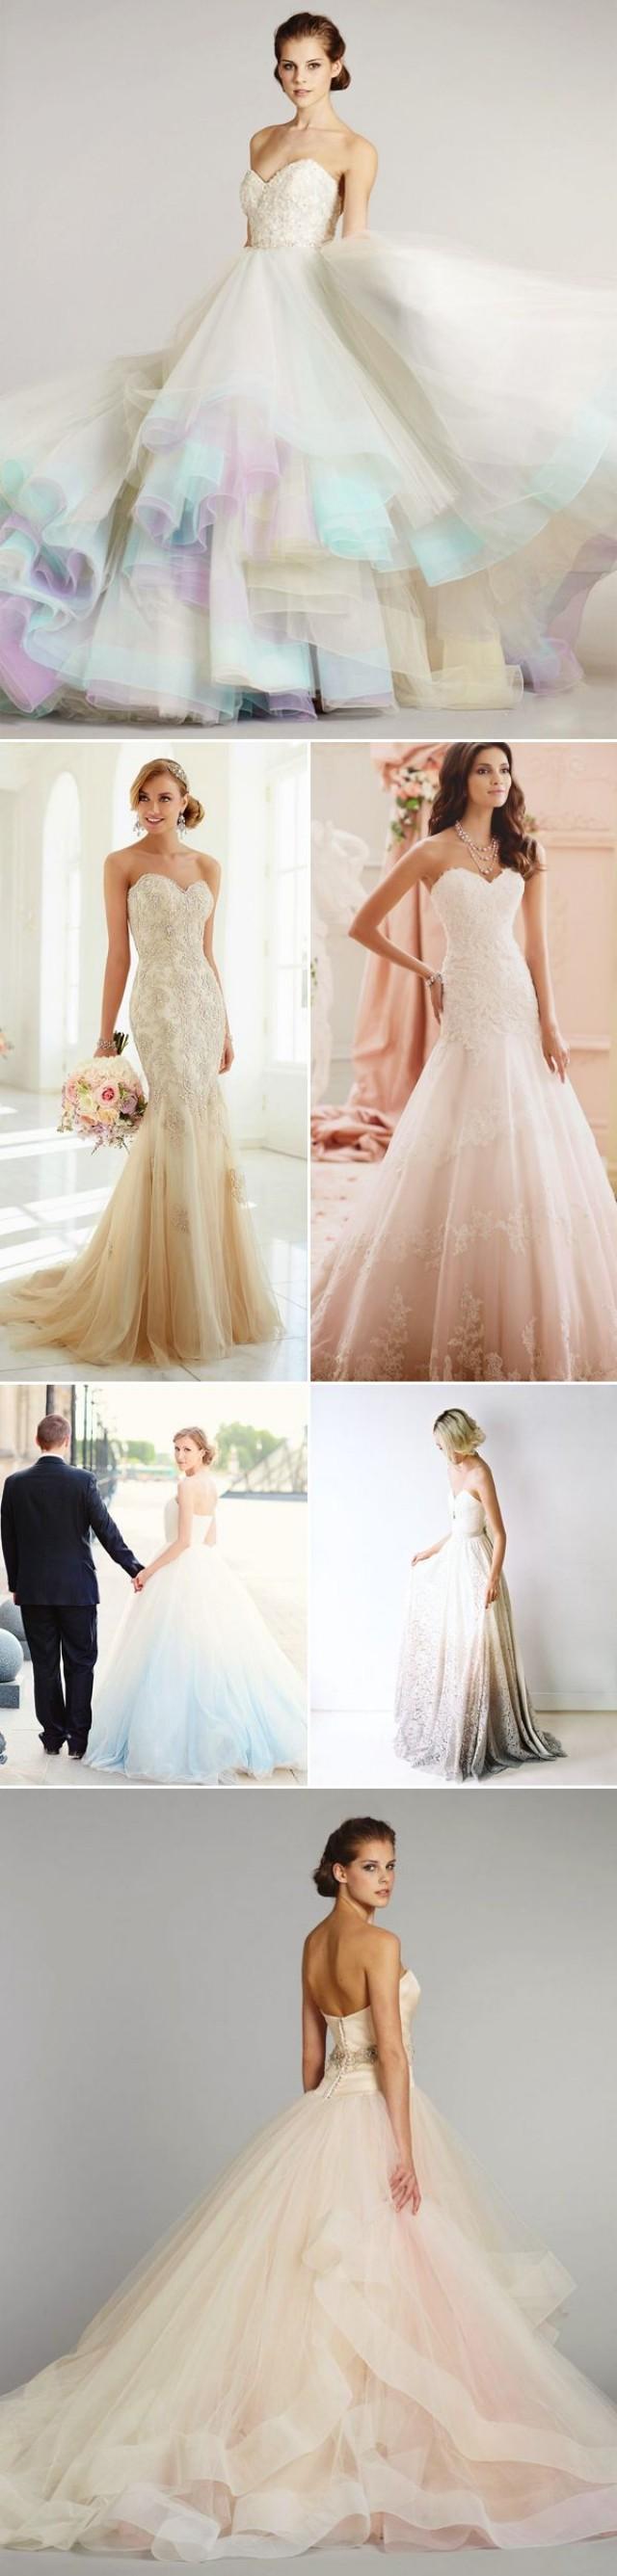 wedding photo - Most Romantic Bridal Trend! 22 "Barely Colorful" Wedding Dresses With A Touch Of Color! - Praise Wedding